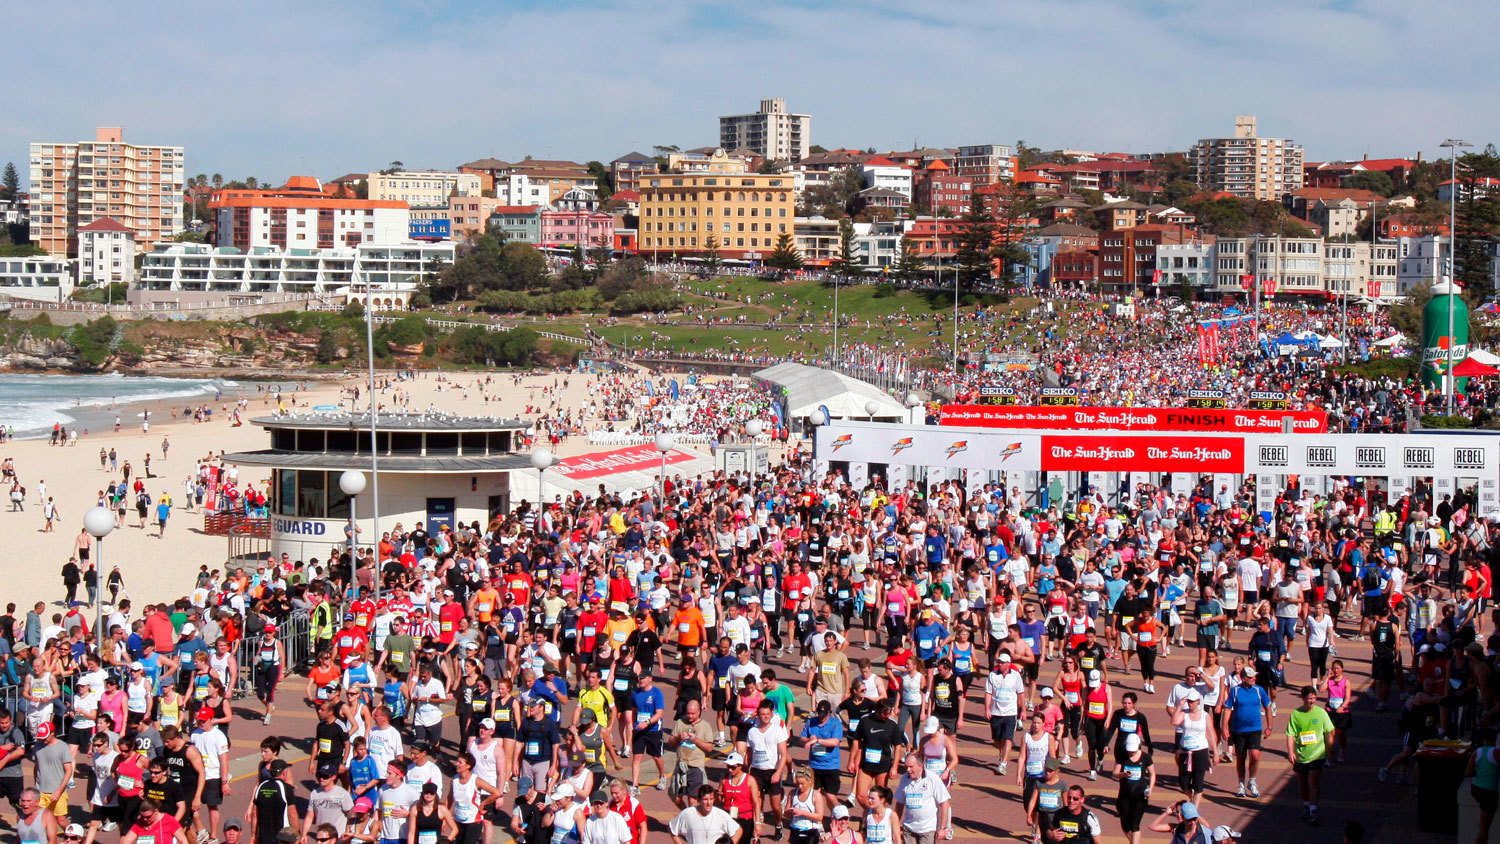 Coach Cronshaw’s tips to getting the most out of your City to Surf - PBCo.